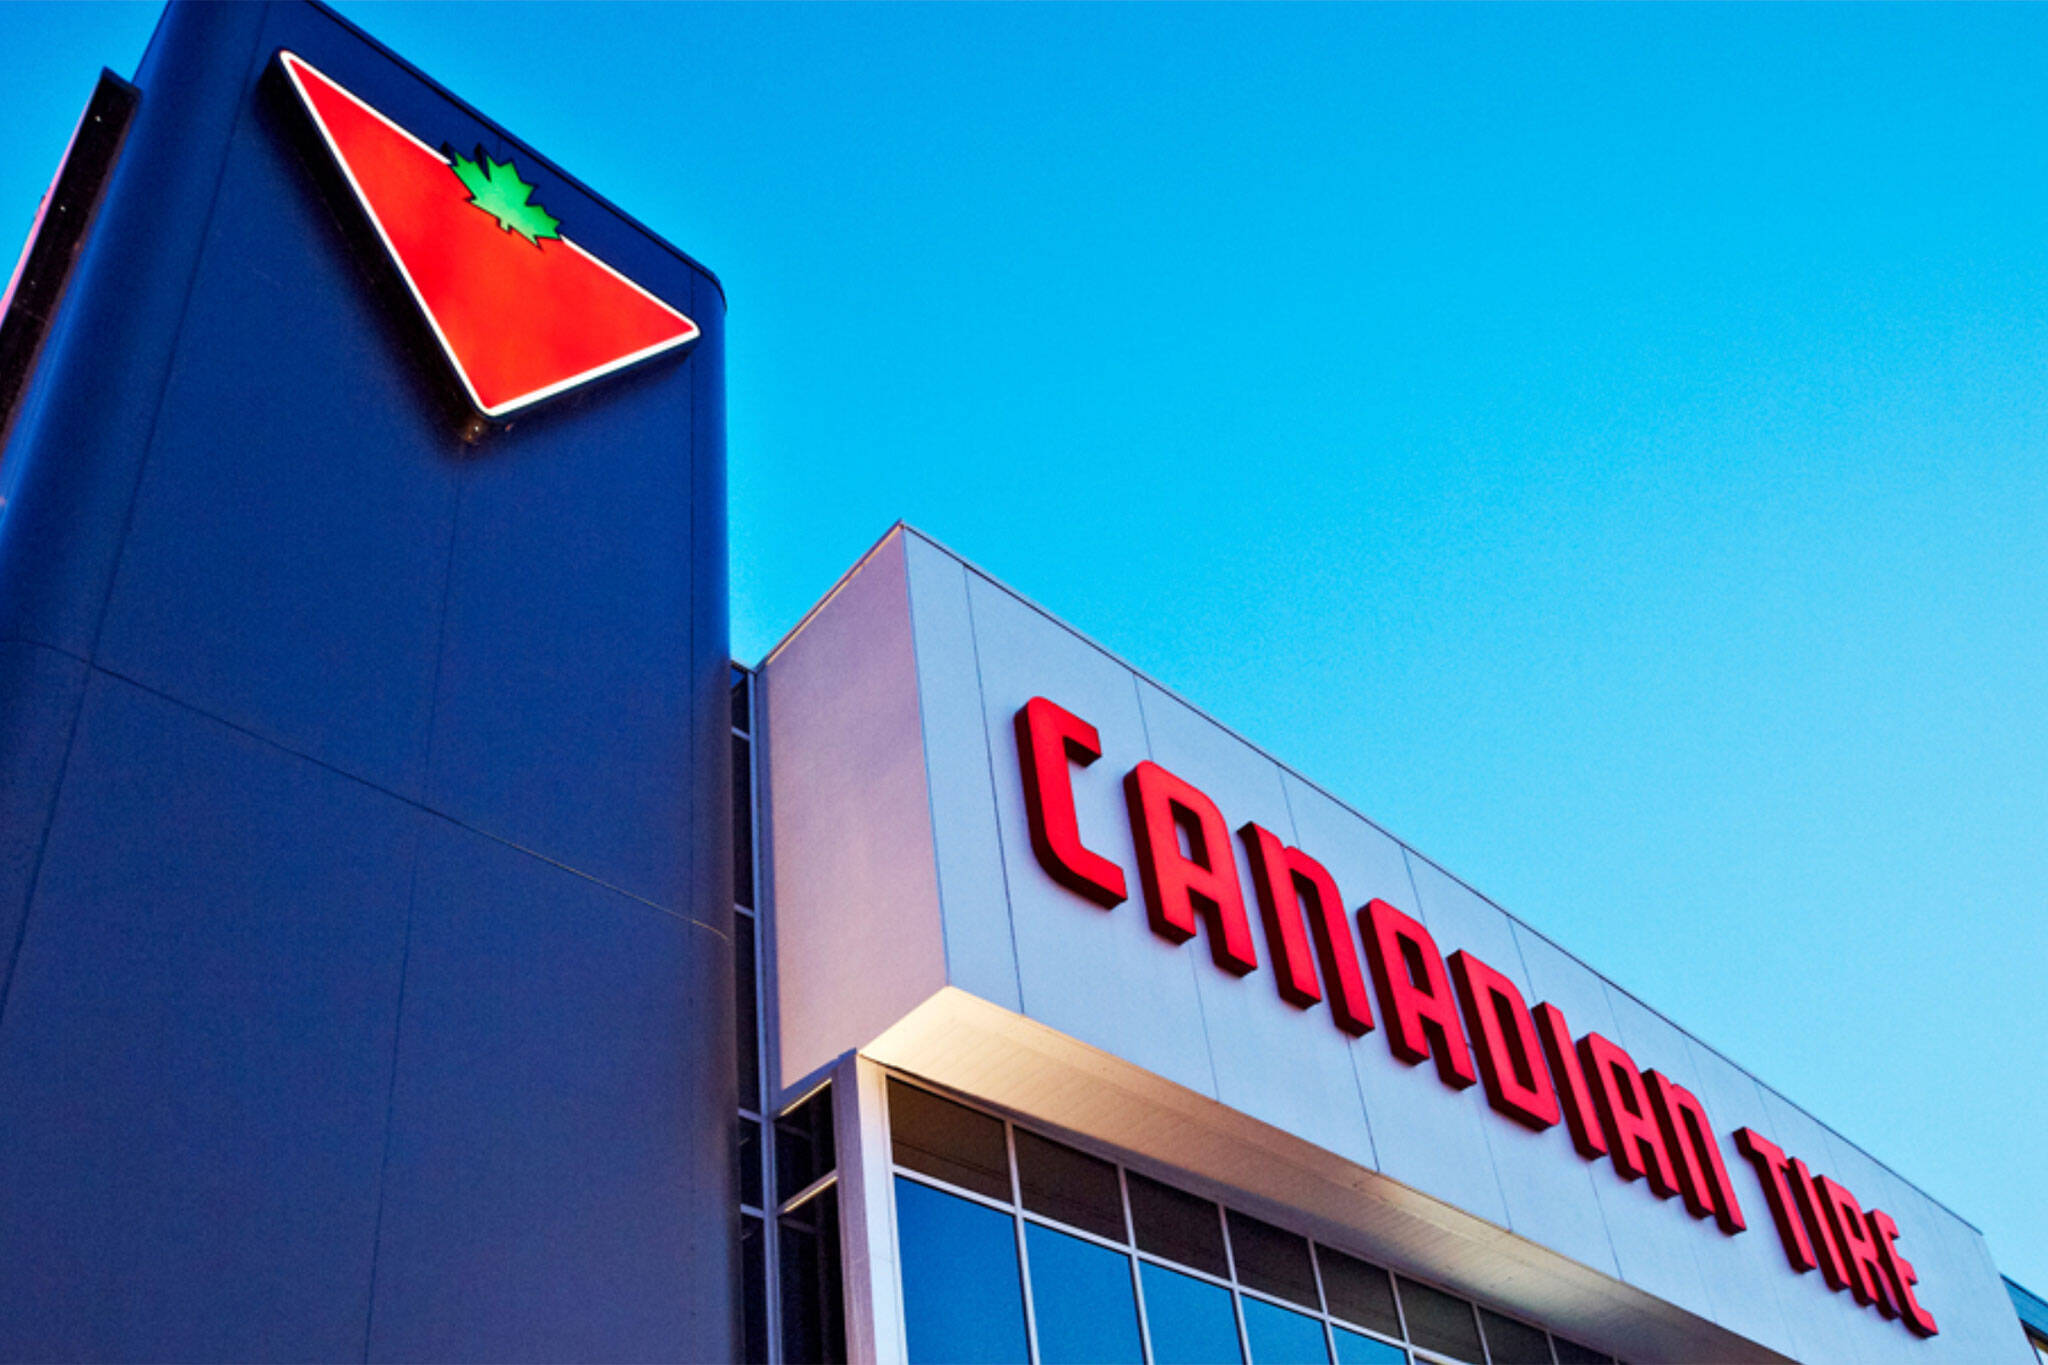 Burnaby Canadian Tire sees profit rebound - Burnaby Now